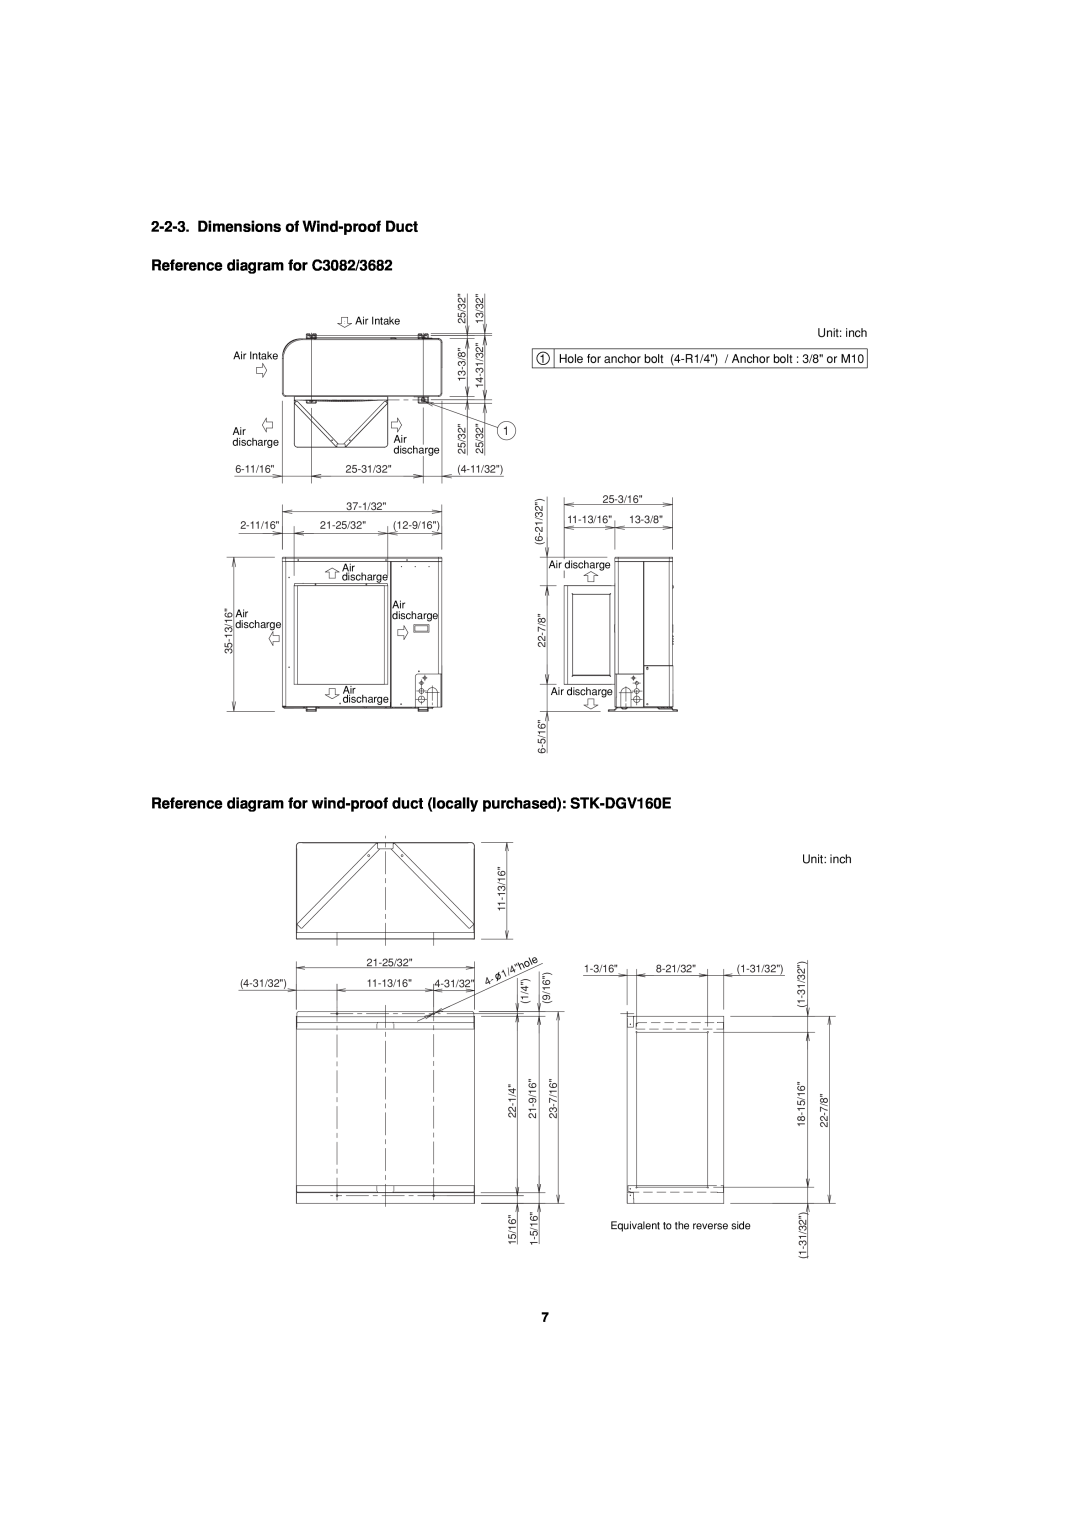 Sanyo C3682 service manual Dimensions of Wind-proof Duct Reference diagram for C3082/3682, Unit inch 